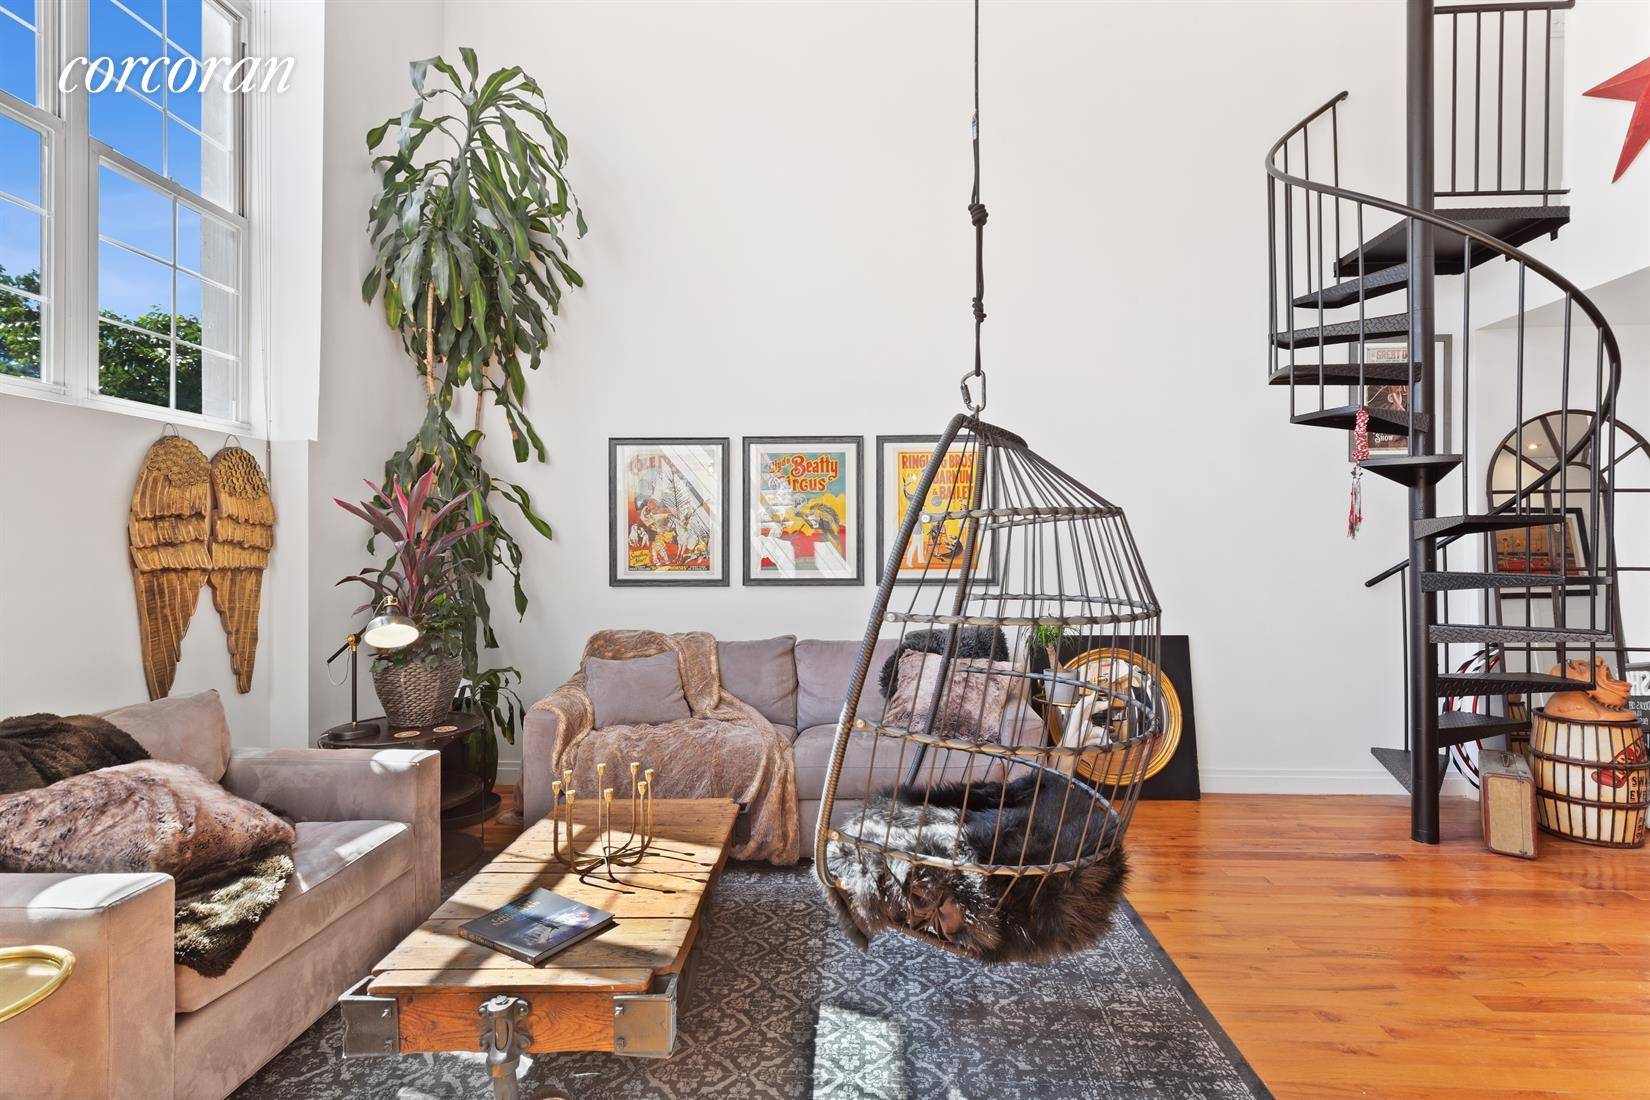 Owned by a juggler and an aerialist, the circus really is in town in this unique and wonderfully imagined 1222 square foot loft.